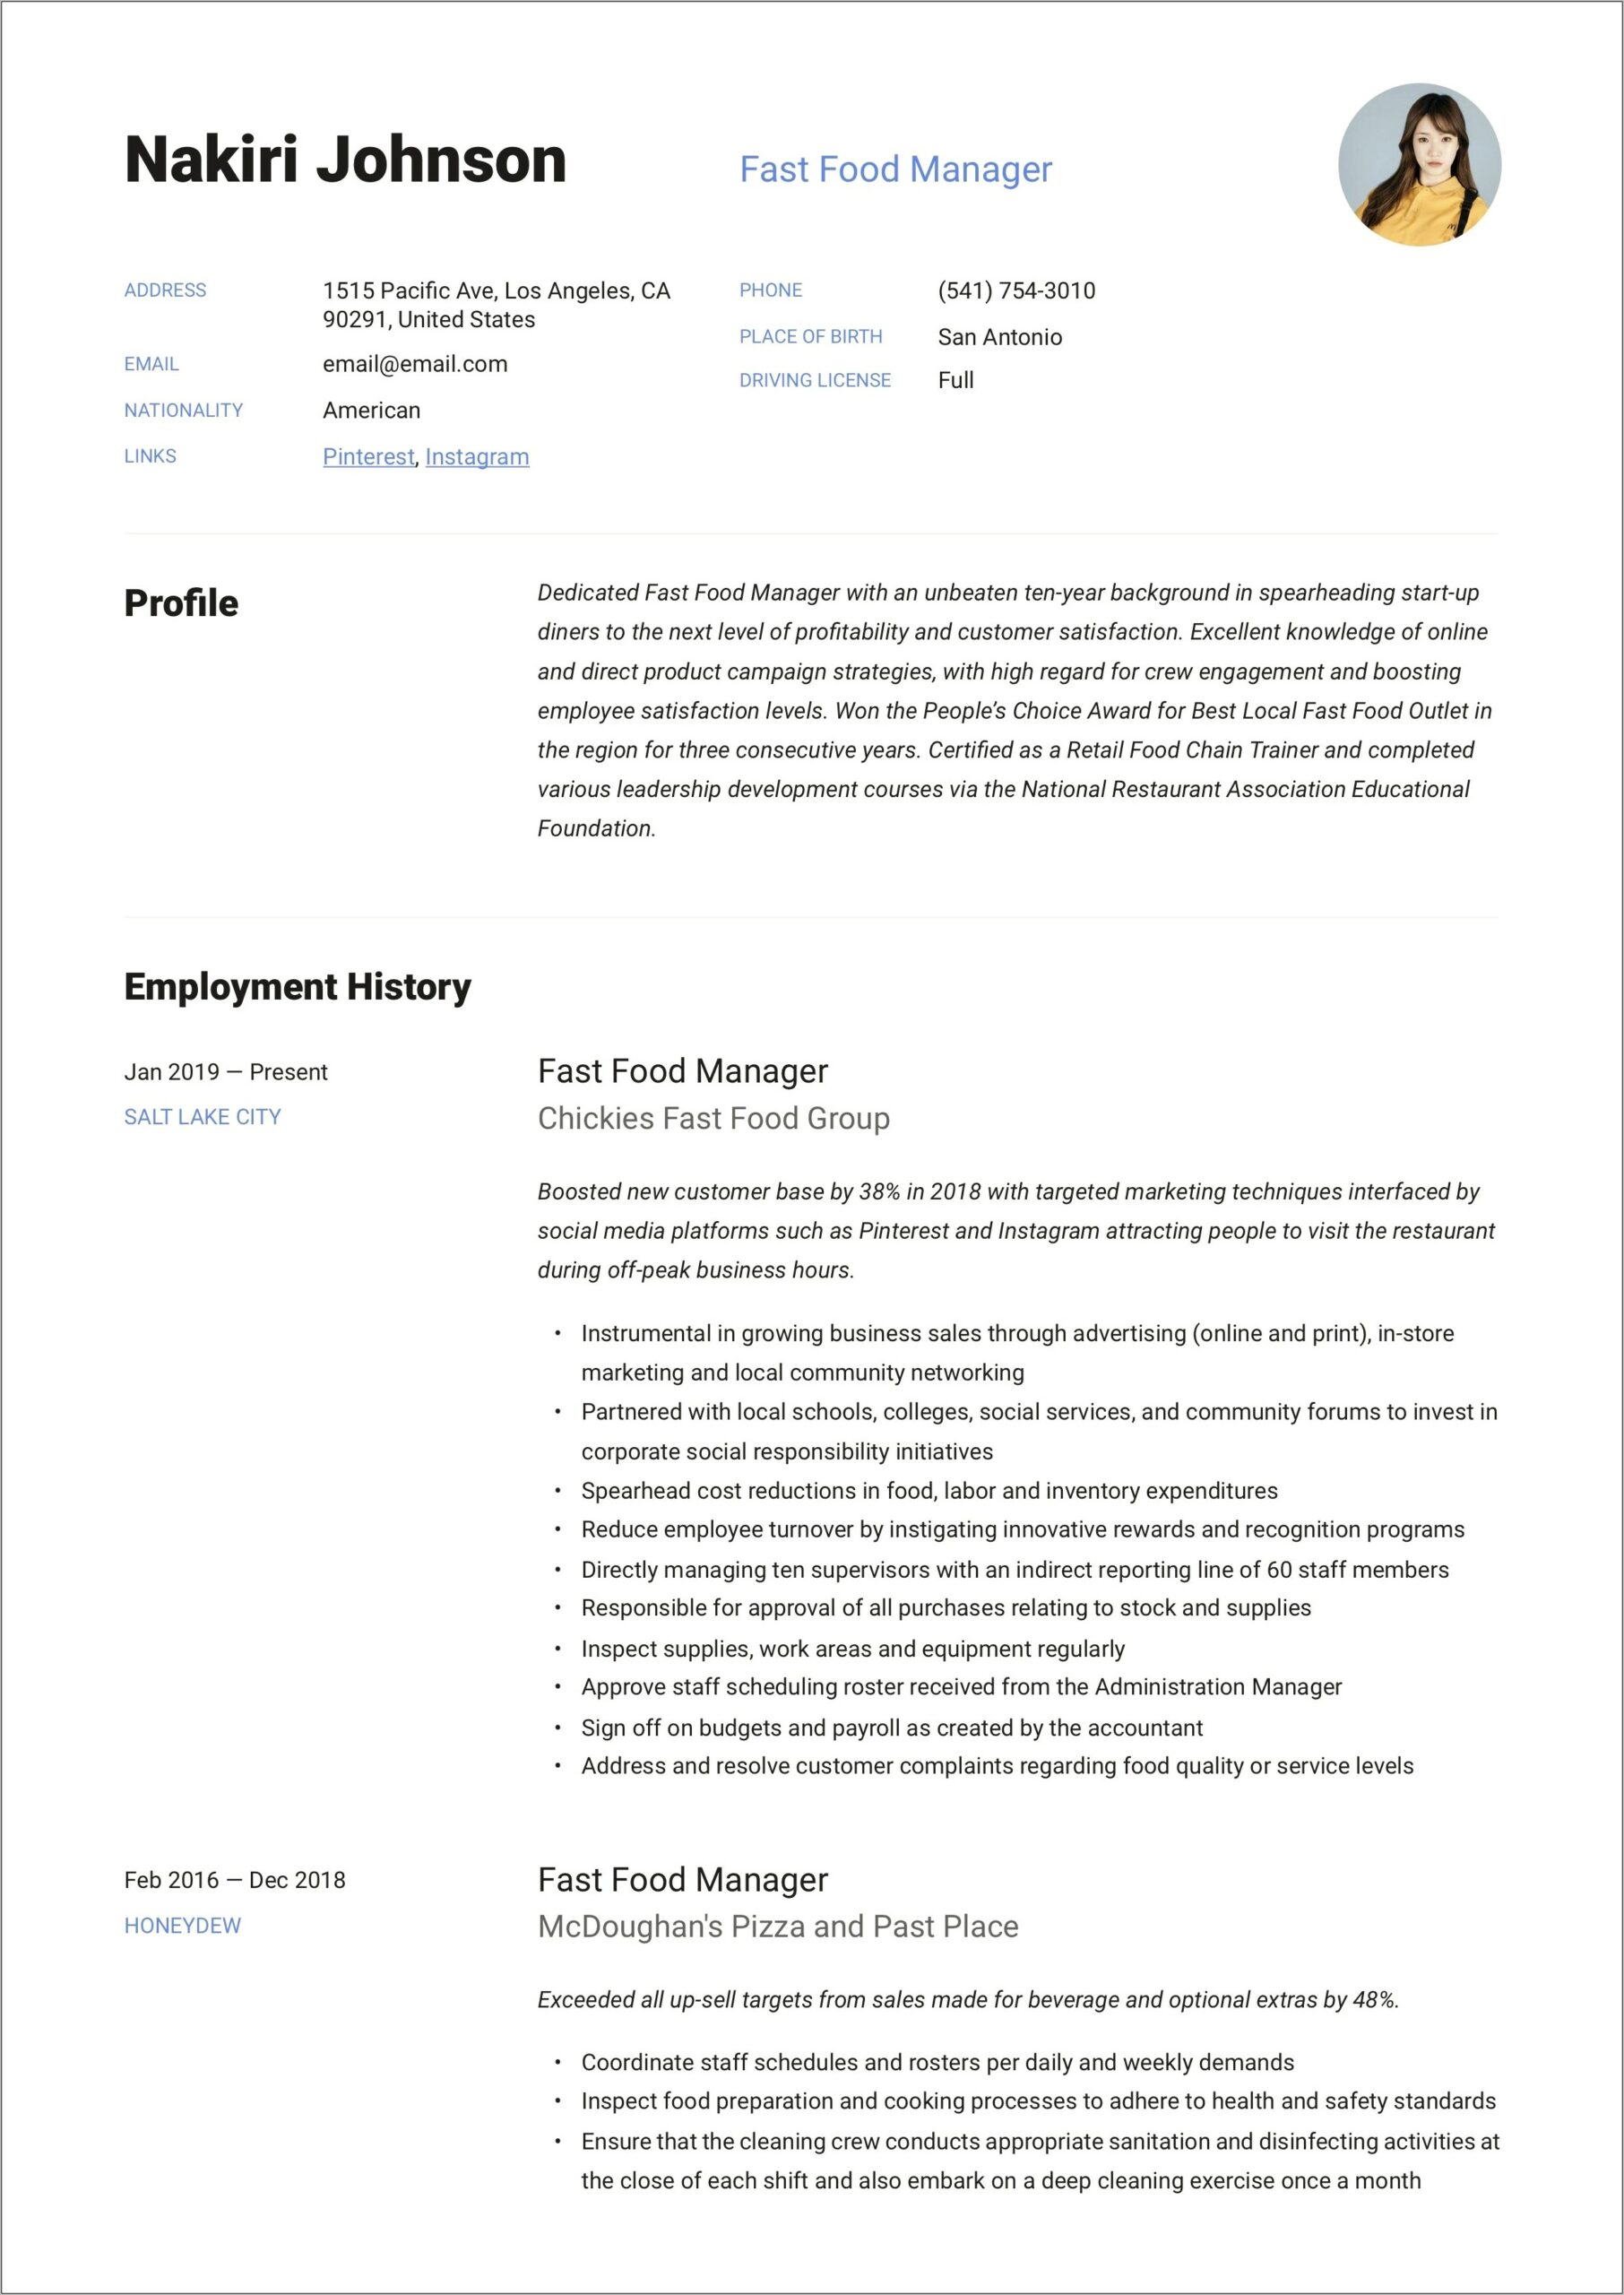 Resume Fast Food Experience Examples